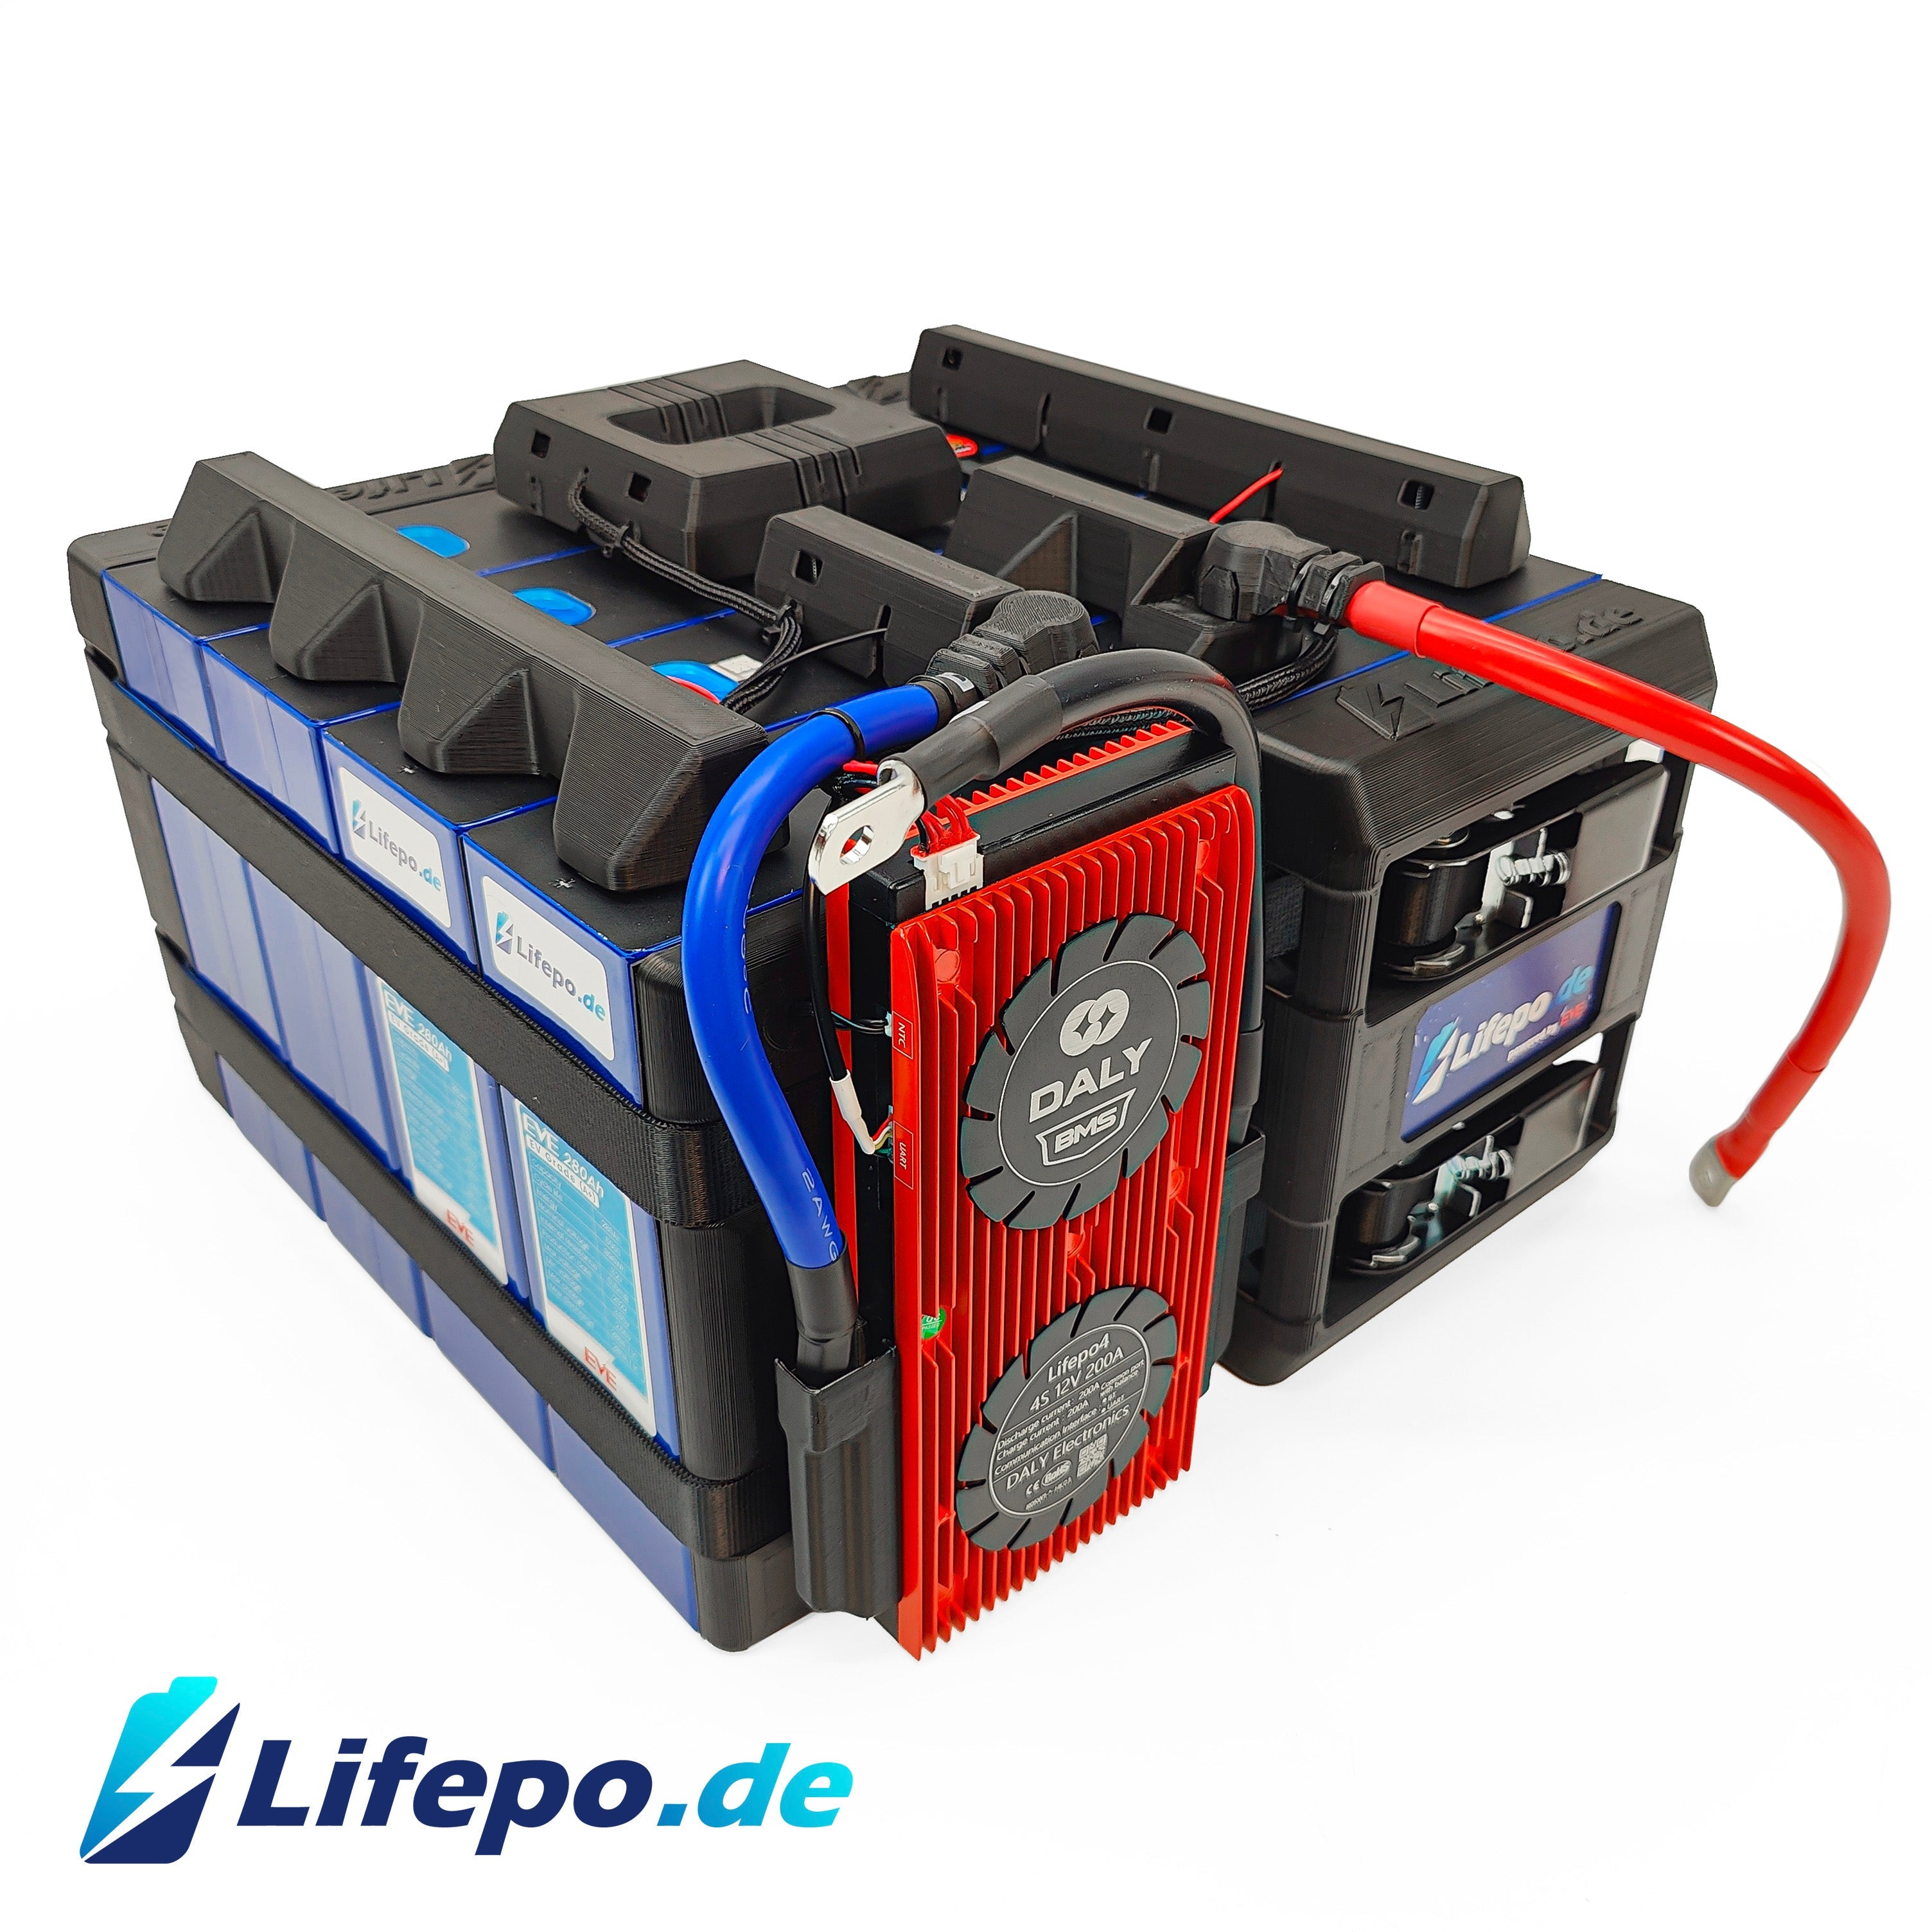 0% VAT 12v 560Ah Lifepo4 battery system with EVE Grade A+ 7.6kWh double row